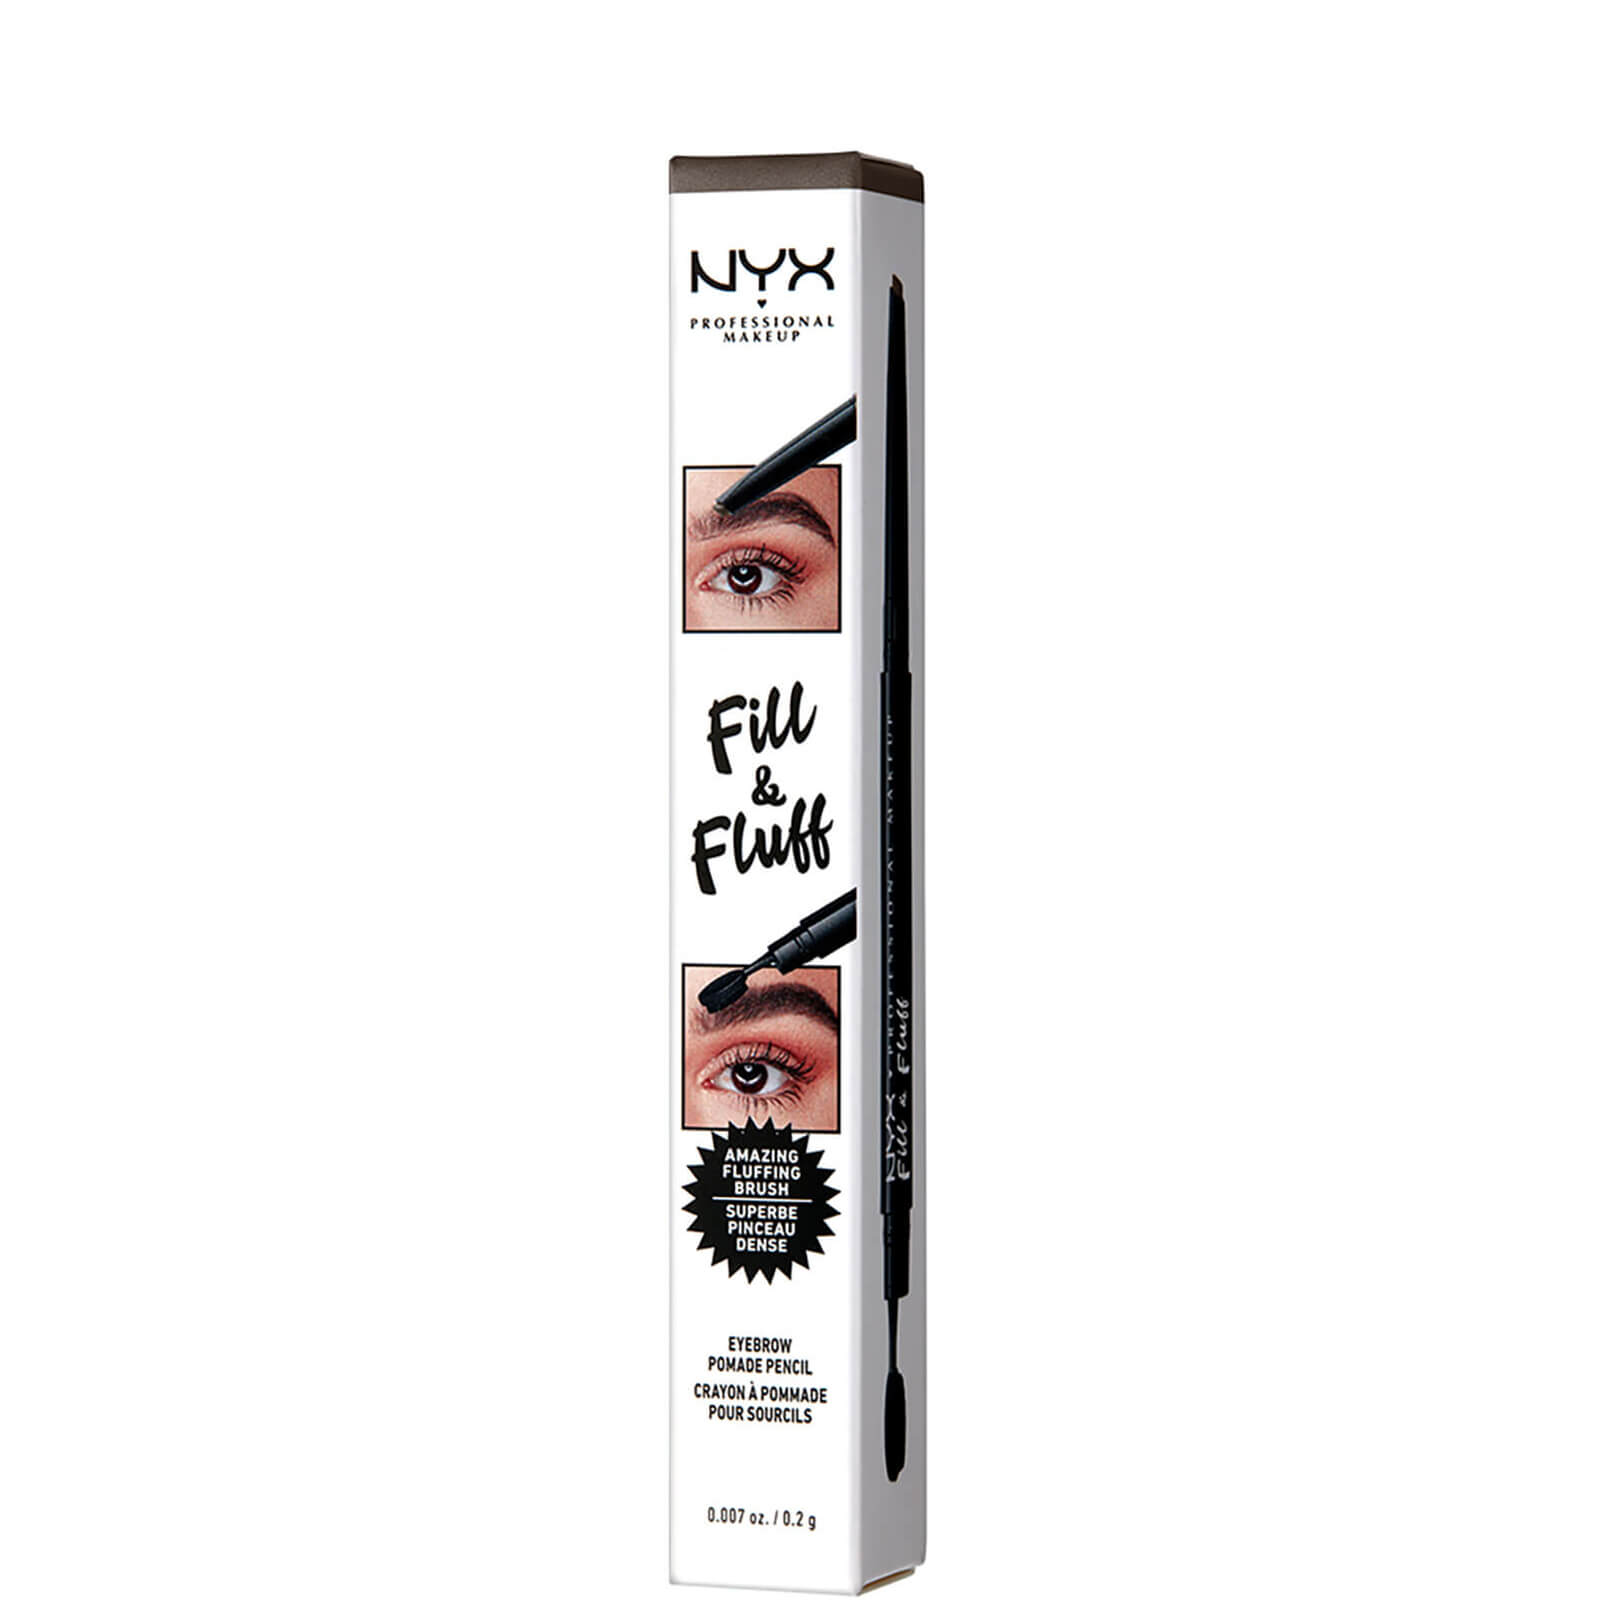 Image of NYX Professional Makeup Fill and Fluff Eyebrow Pomade Pencil 0.2g (Various Shades) - Brunette